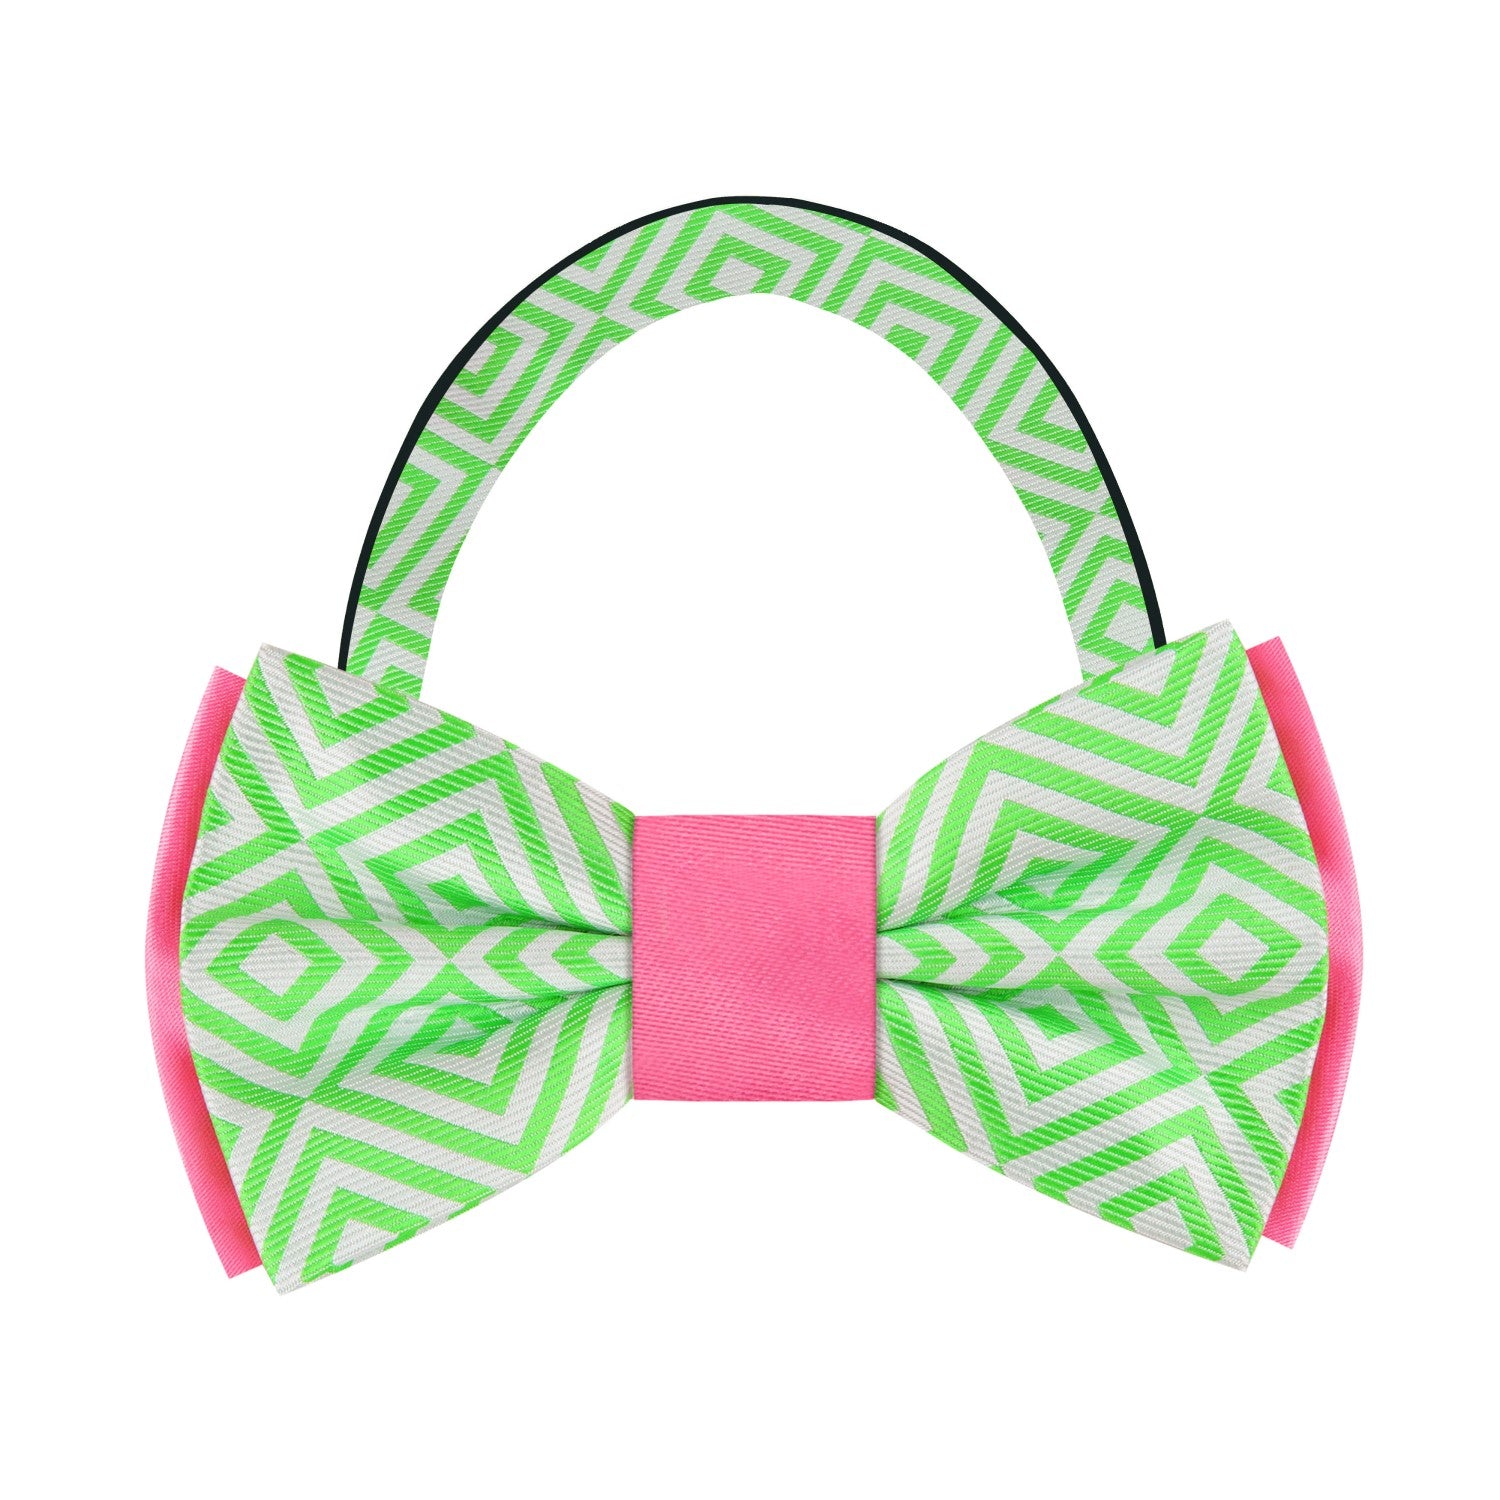 Green, Pink, White Geometric Bow Tie Pre Tied